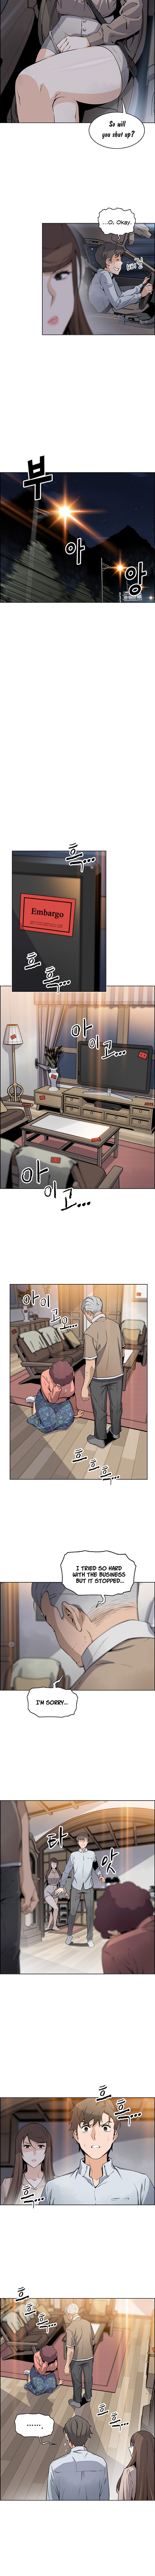 Housekeeper Manhwa - Chapter 45 Page 2